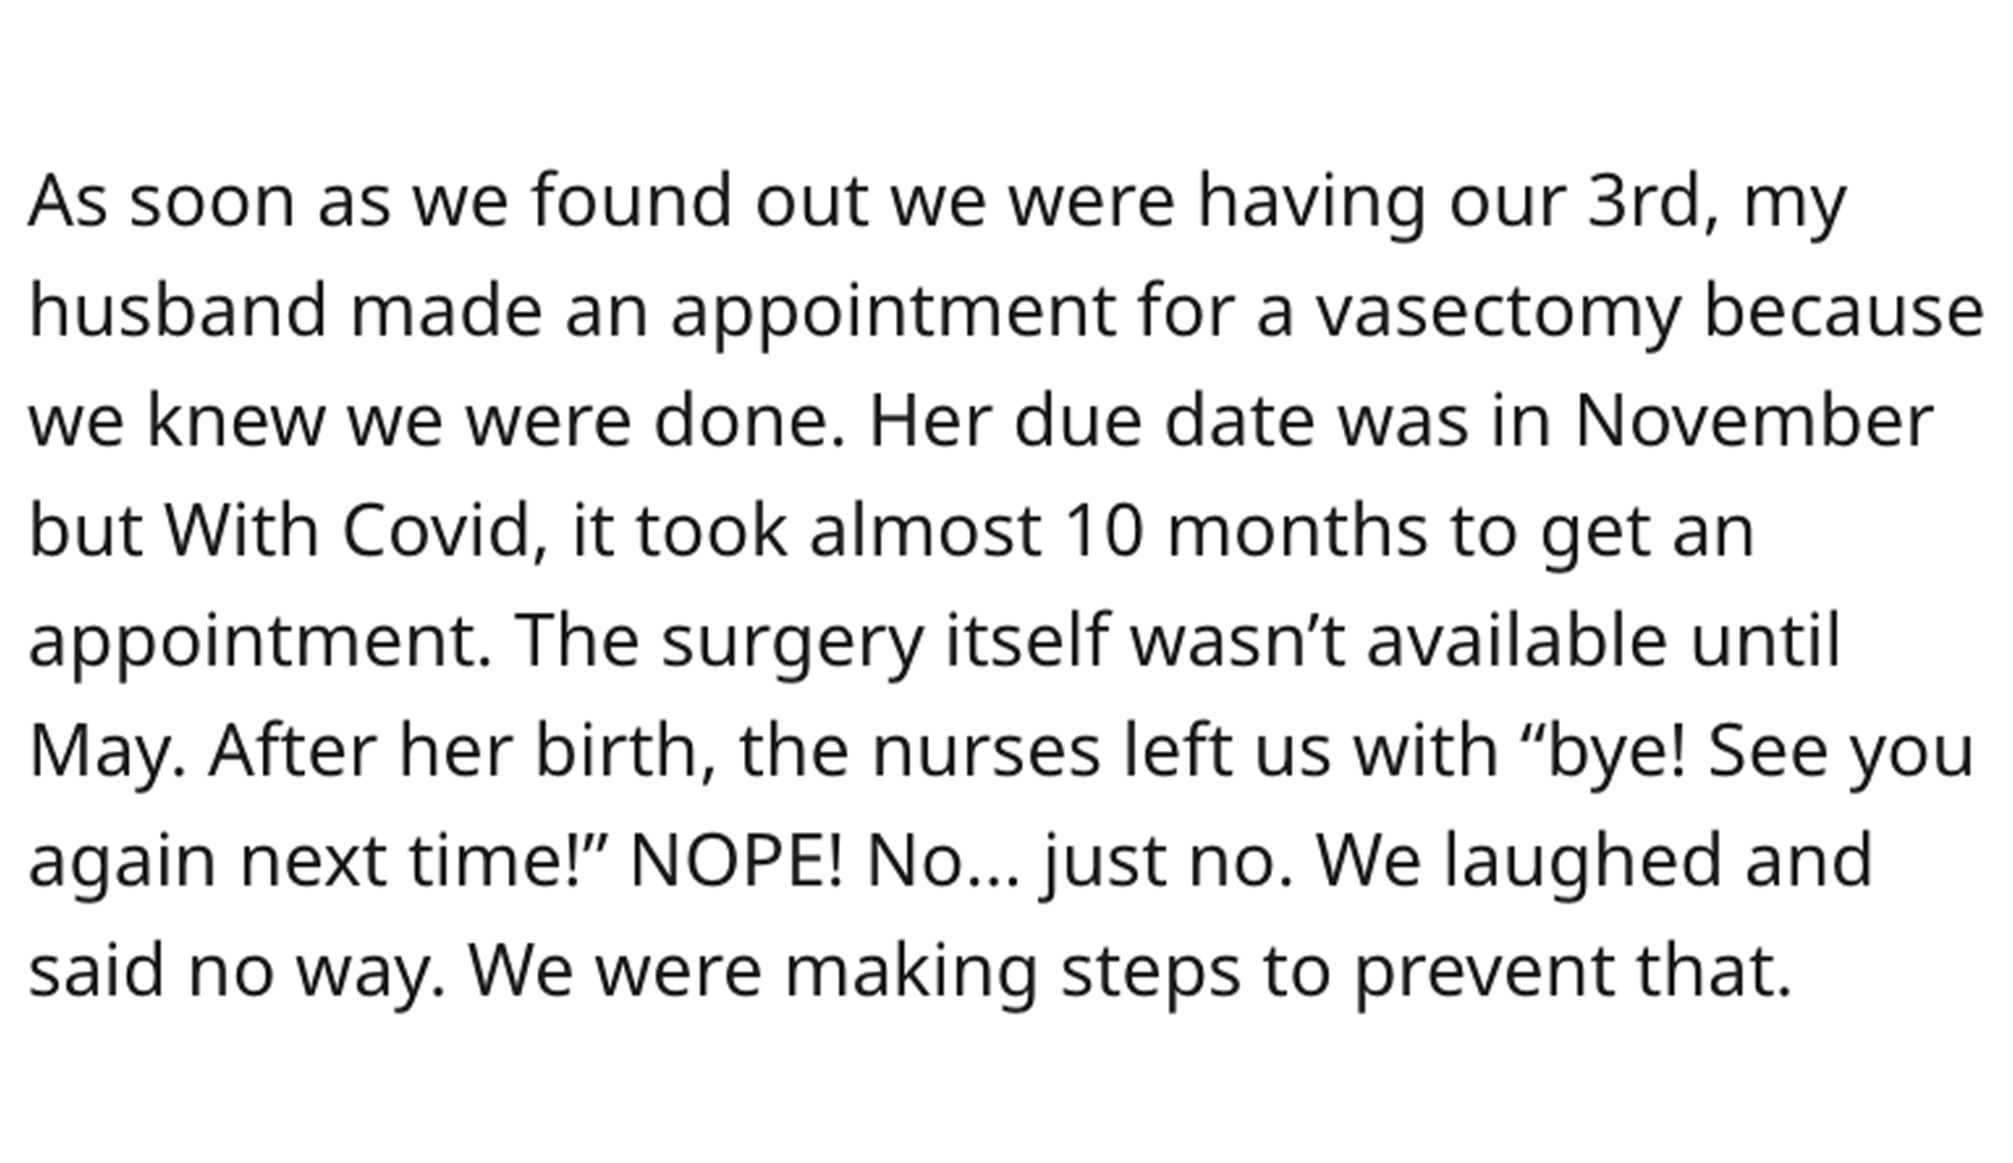 Premature Celebration Story Reddit - love you quotes - As soon as we found out we were having our 3rd, my husband made an appointment for a vasectomy because we knew we were done. Her due date was in November but With Covid, it took almost 10 months to ge